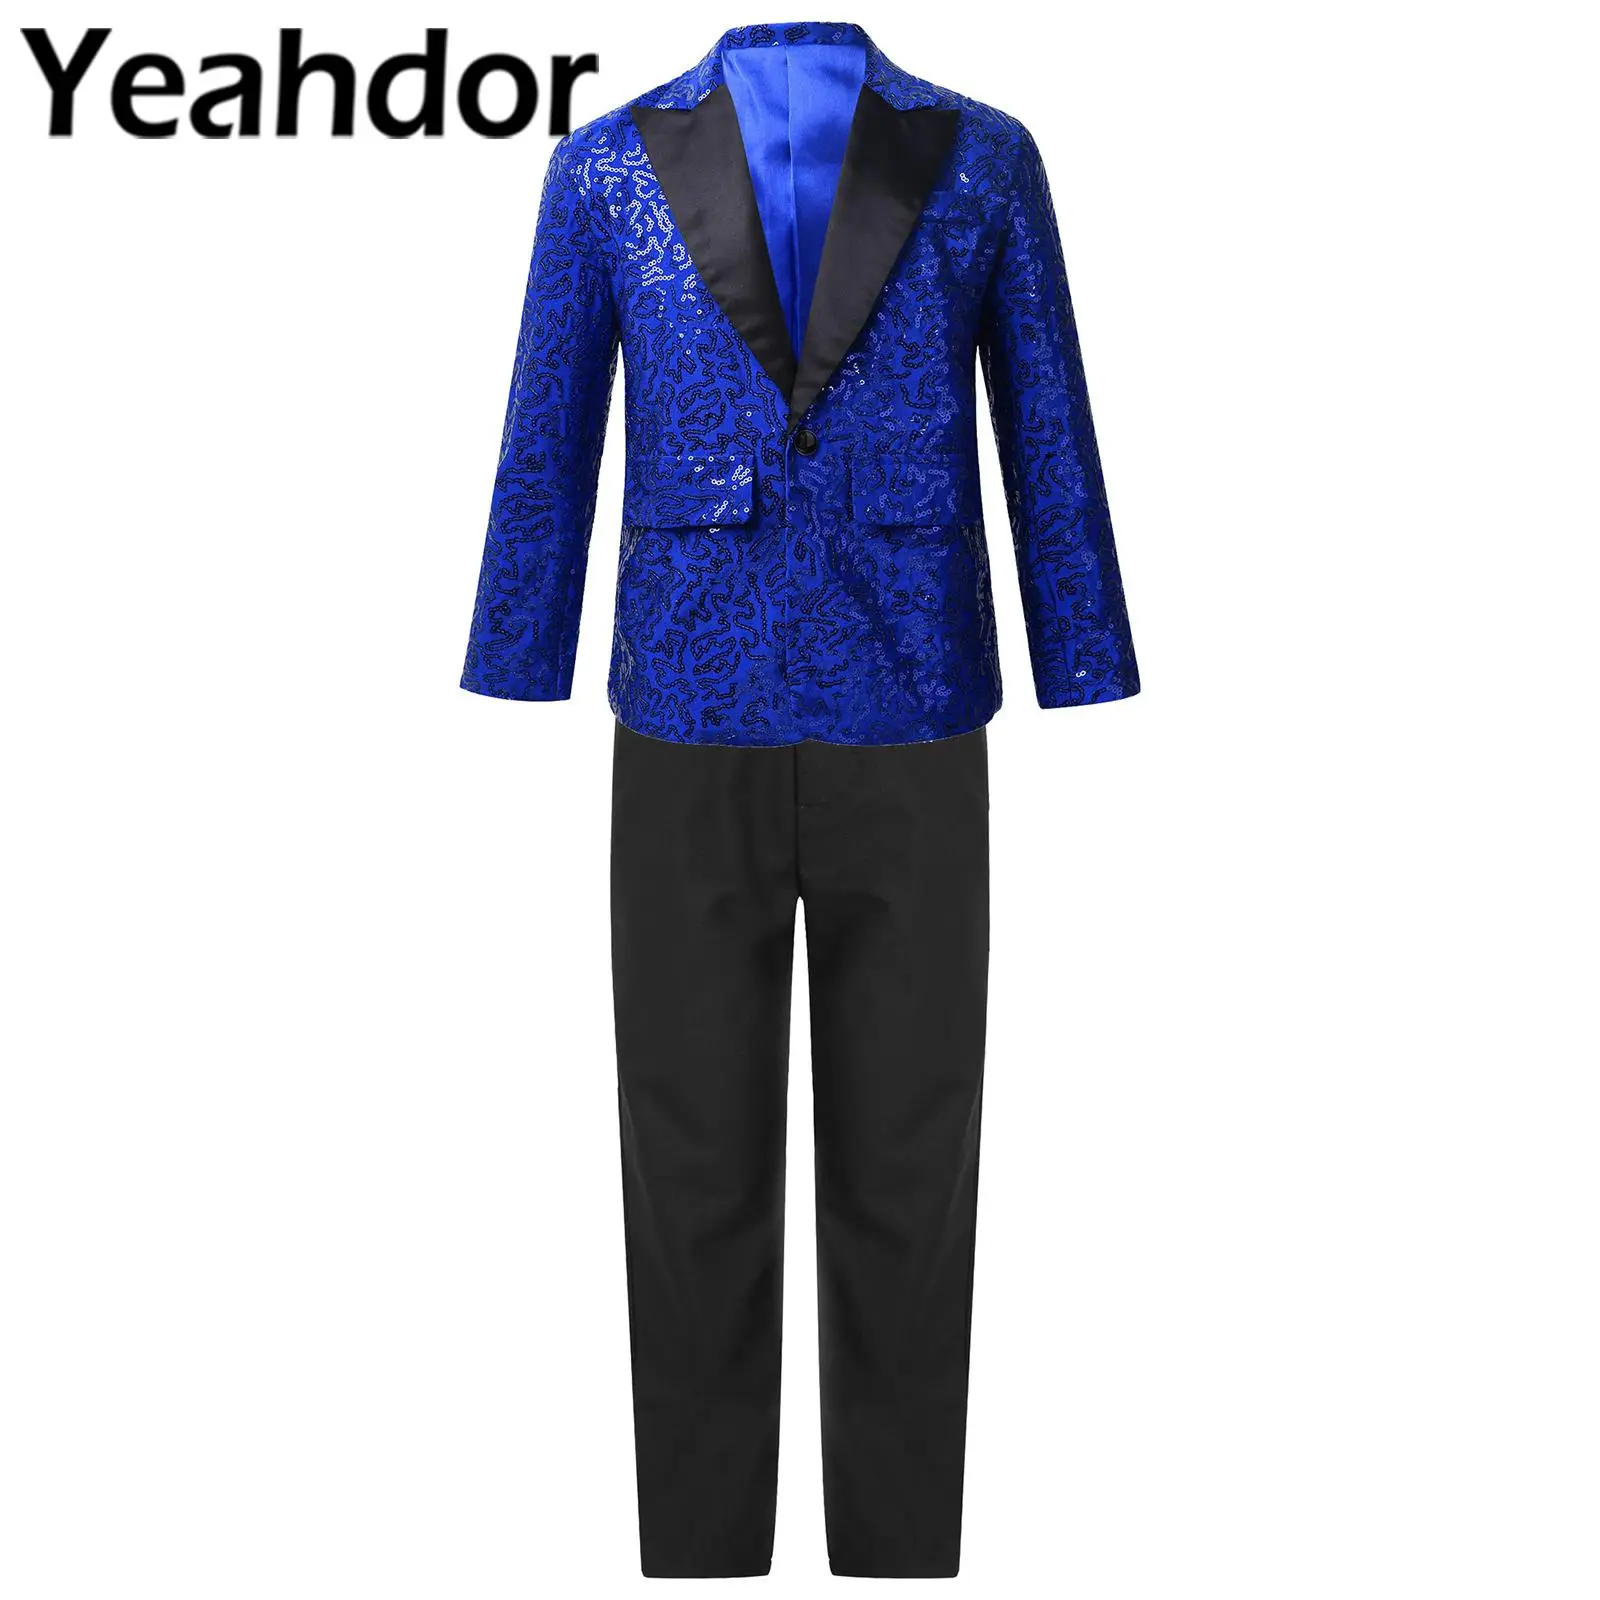 Kids Boys Formal Dress Outfits Teens Gentleman Sequins Tuxedo Blazer Boy's Wedding Suits for Banquet Birthday Party Performance